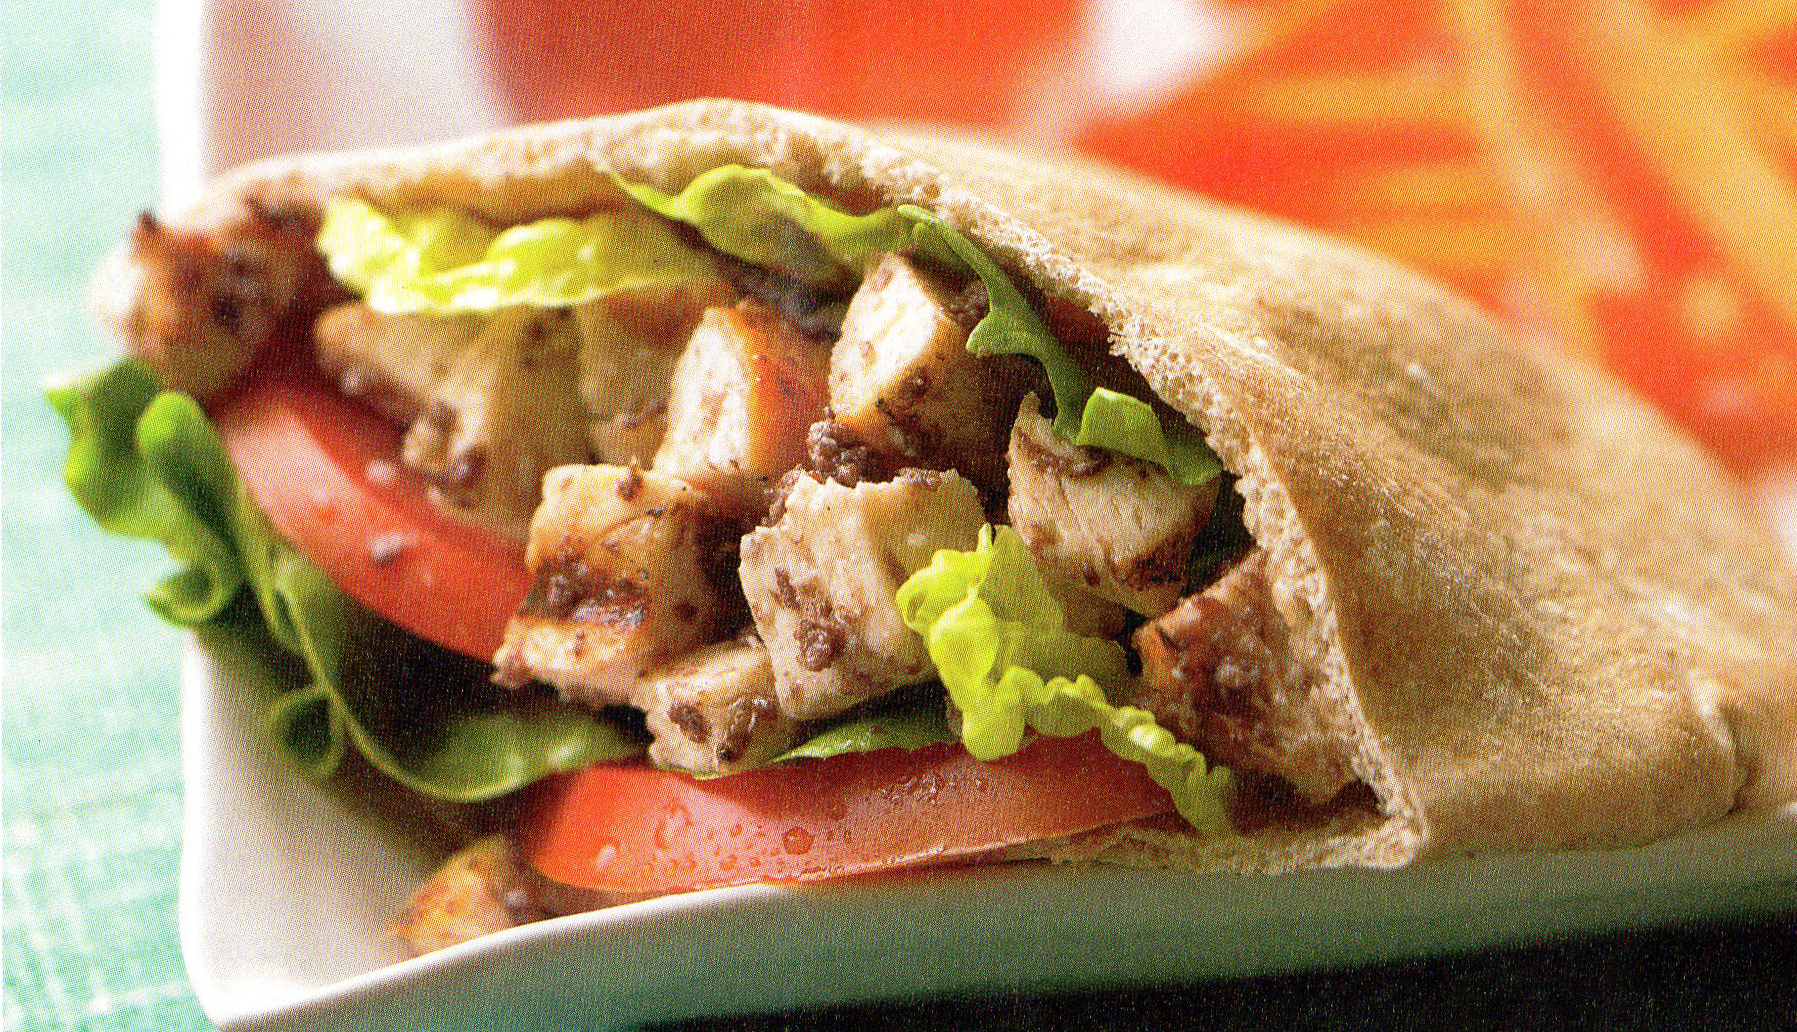 a pita cut in half showing cubed chicken lettuce and tomatoes inside